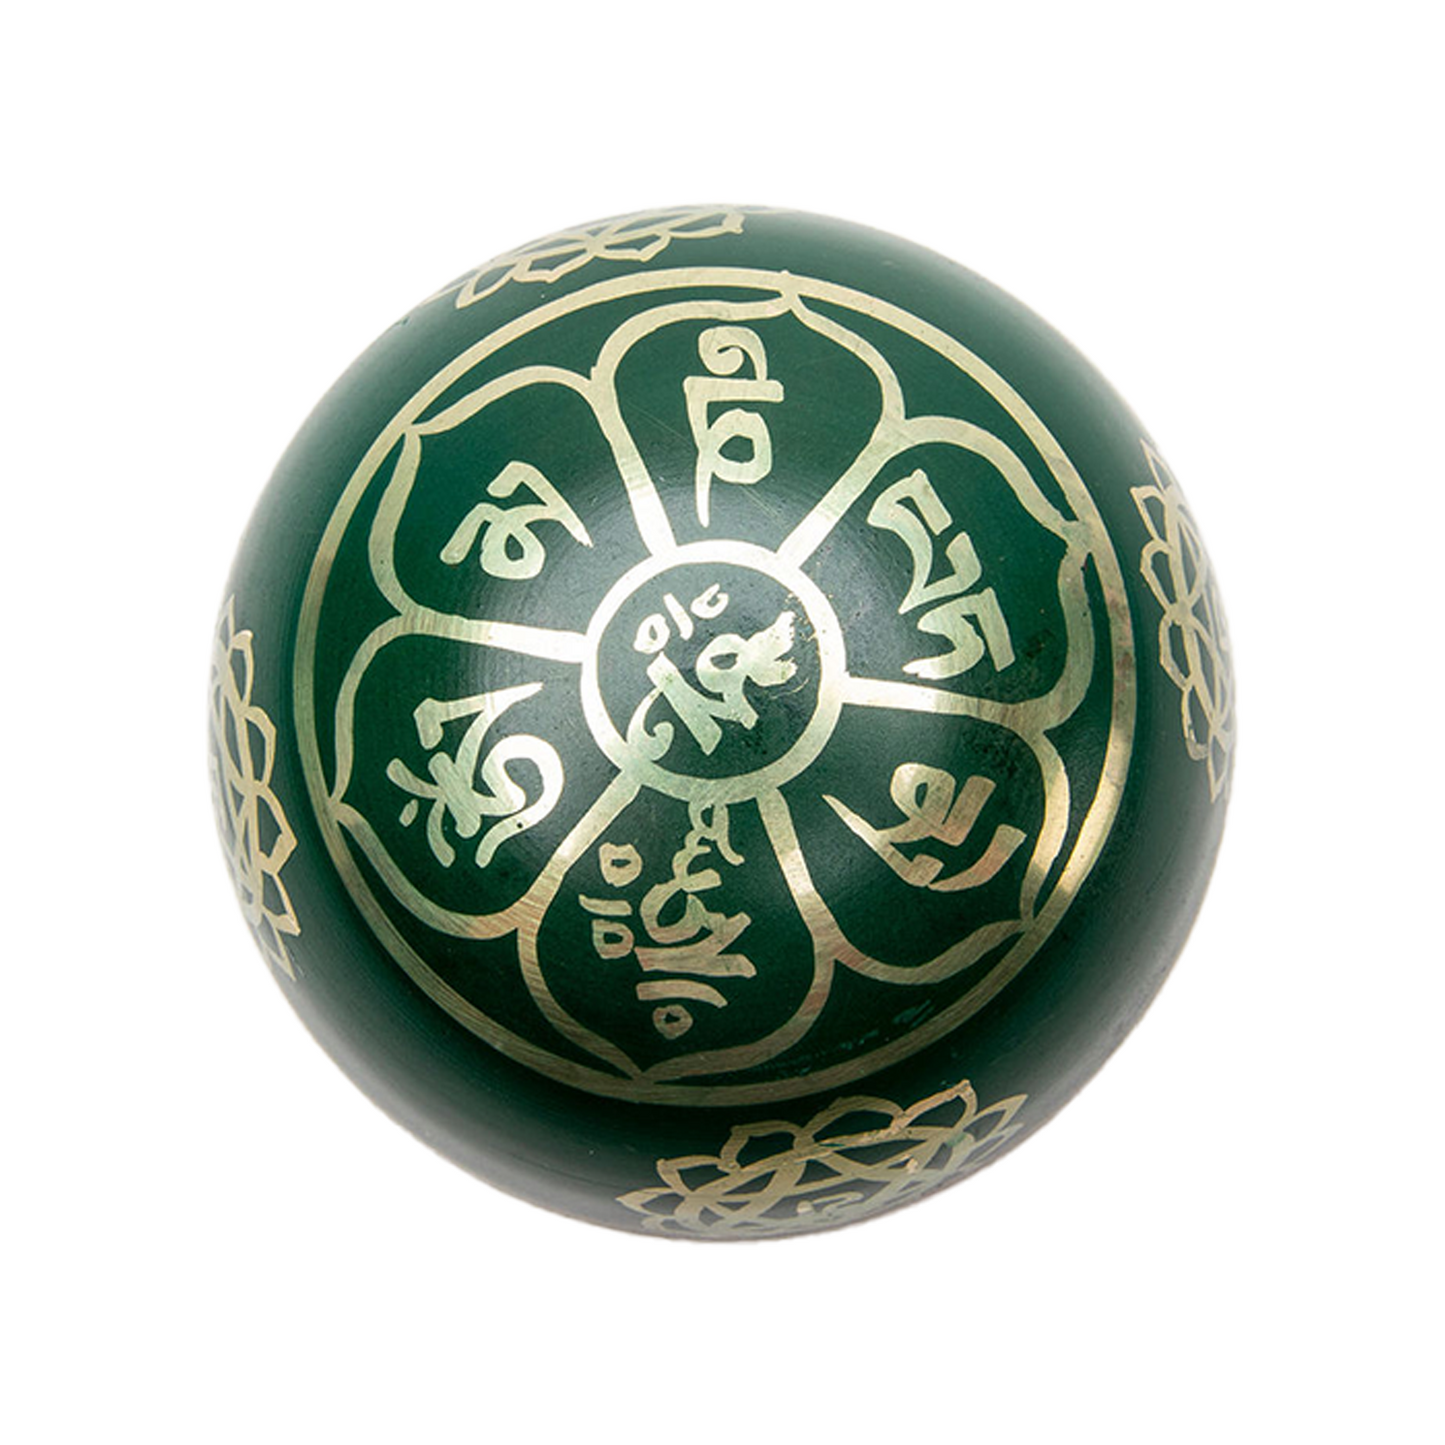 Underside view of the green chakra (heart chakra) bowl on a white backdrop.